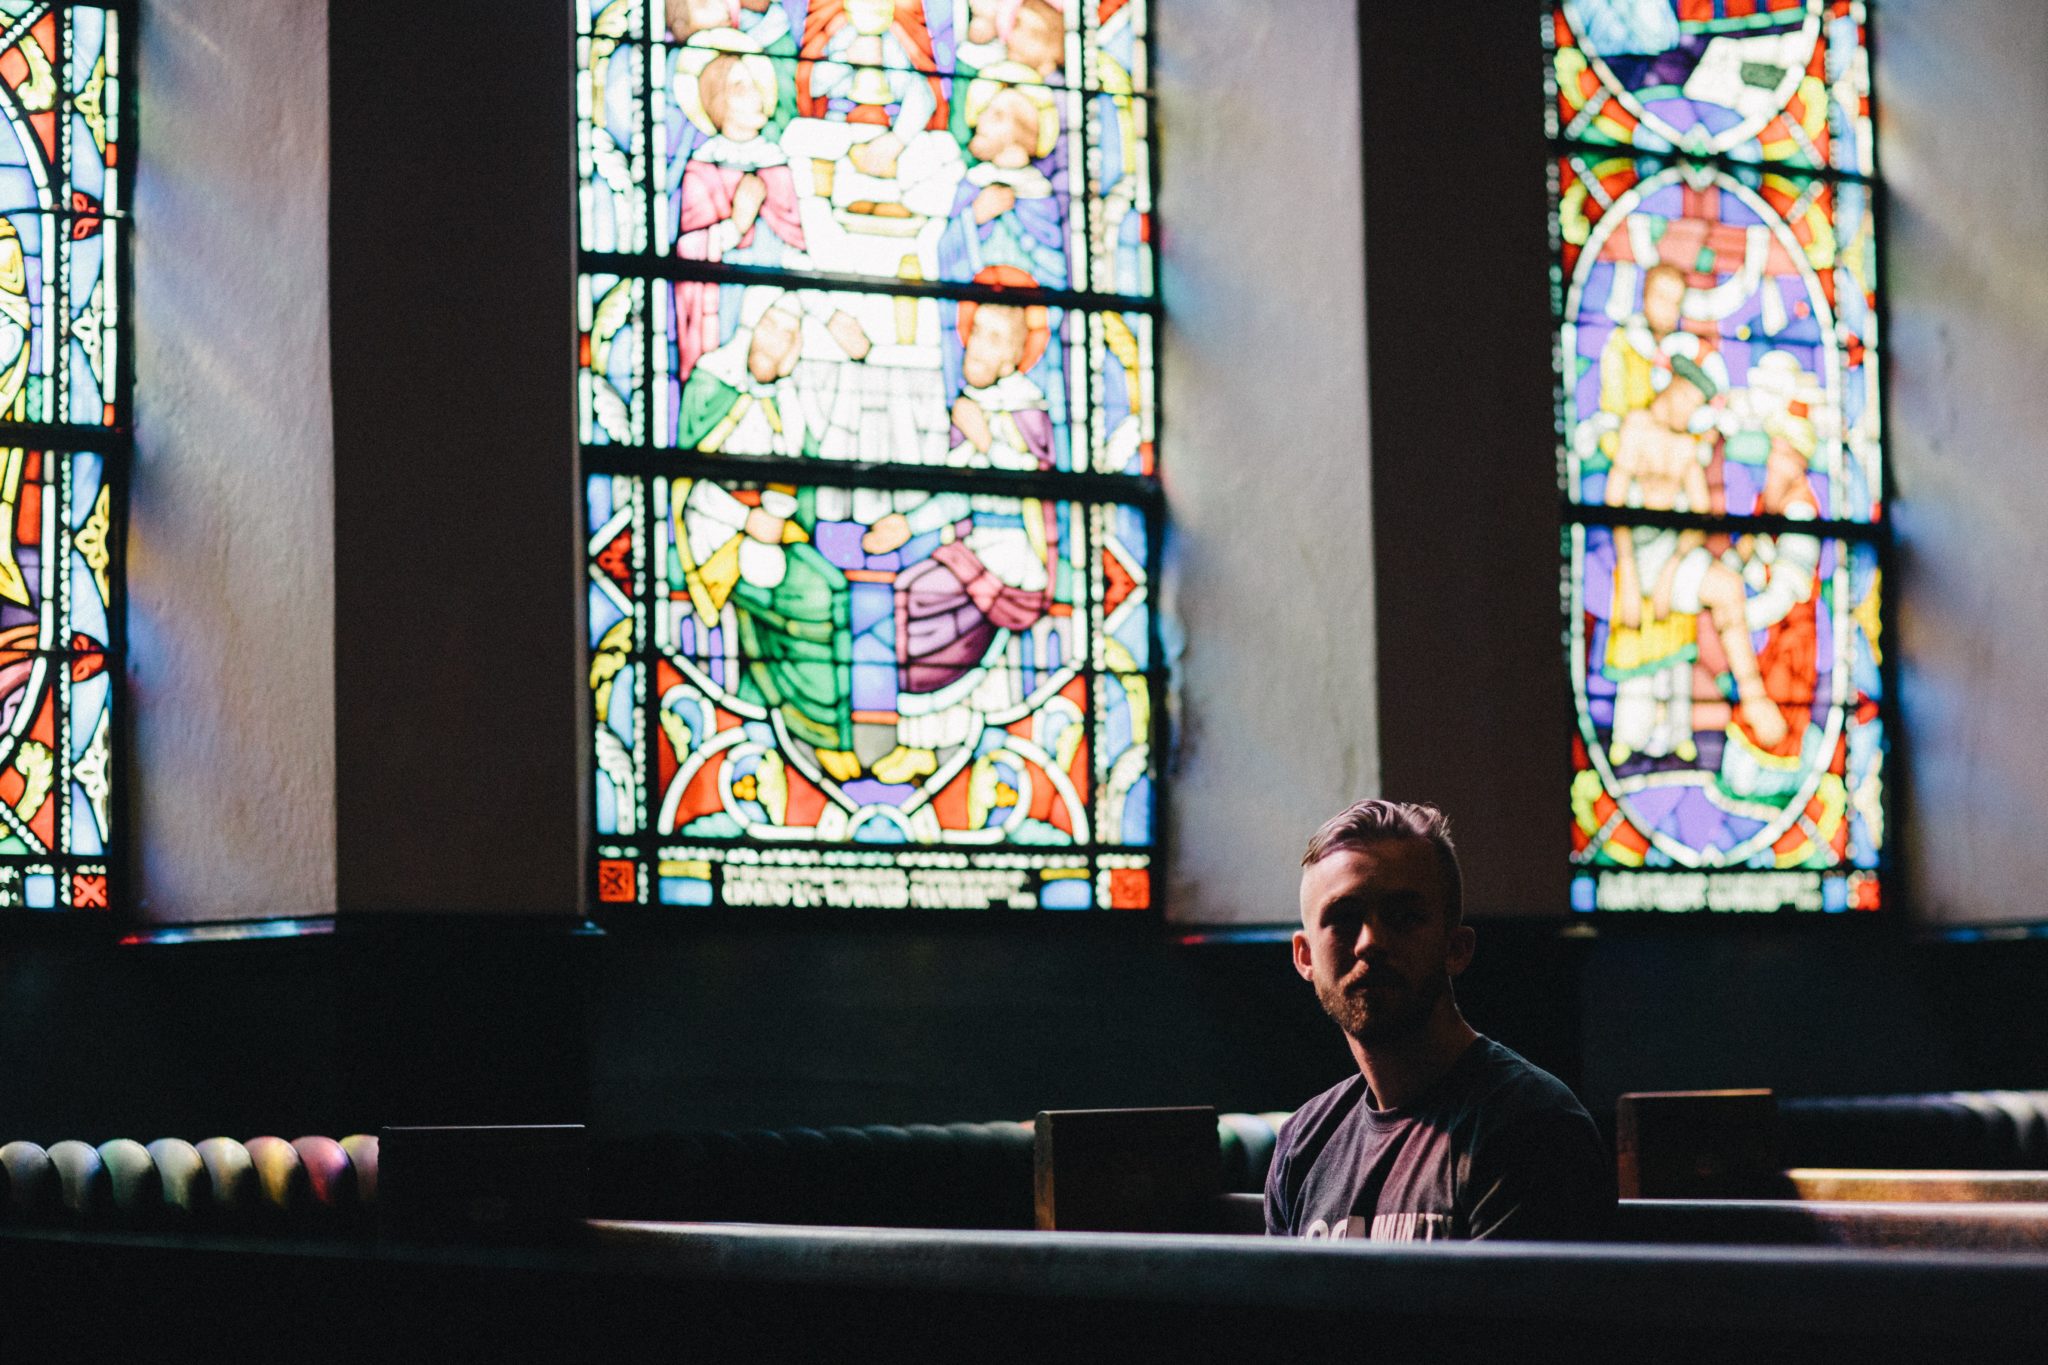 Why Is There a Generation Missing from Church?